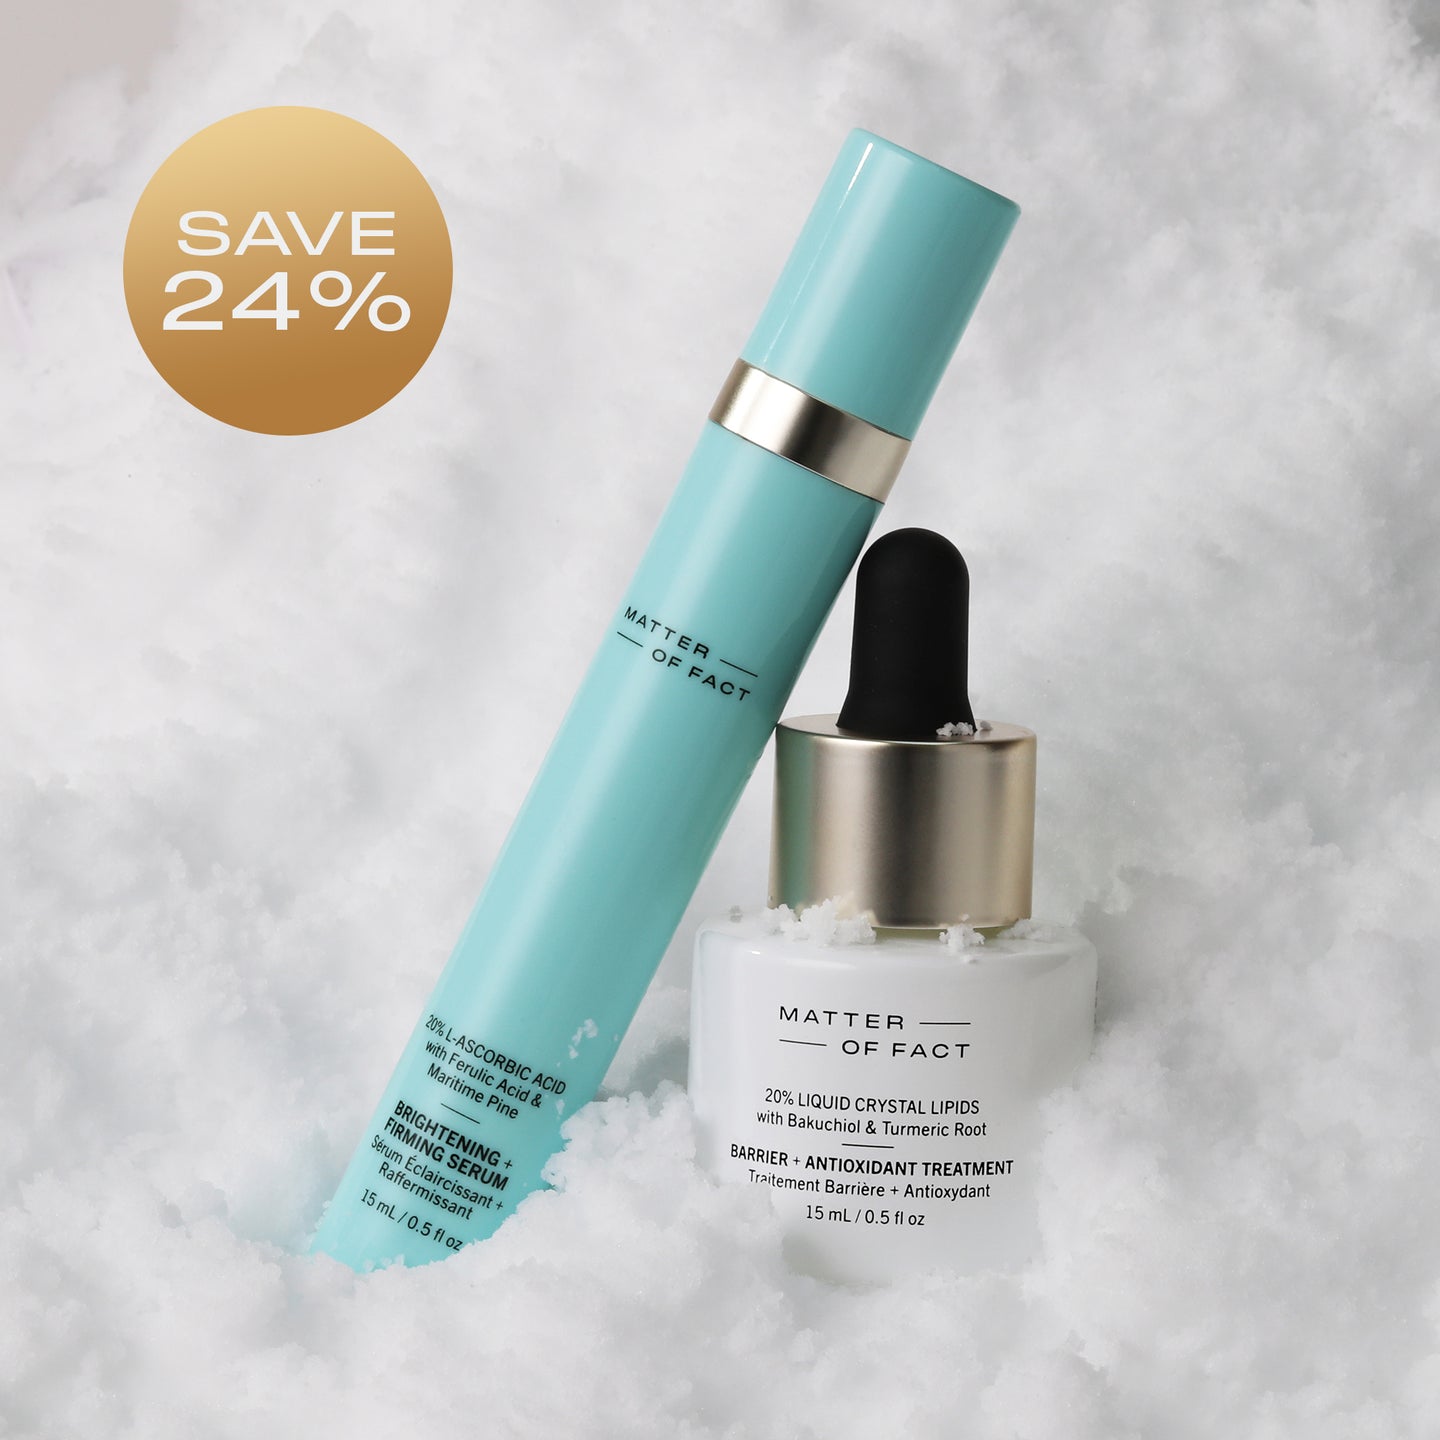 BRIGHTENING + FIRMING SERUM travel size and BARRIER + ANTIOXIDANT TREATMENT travel size on snow showing percent savings for the duo